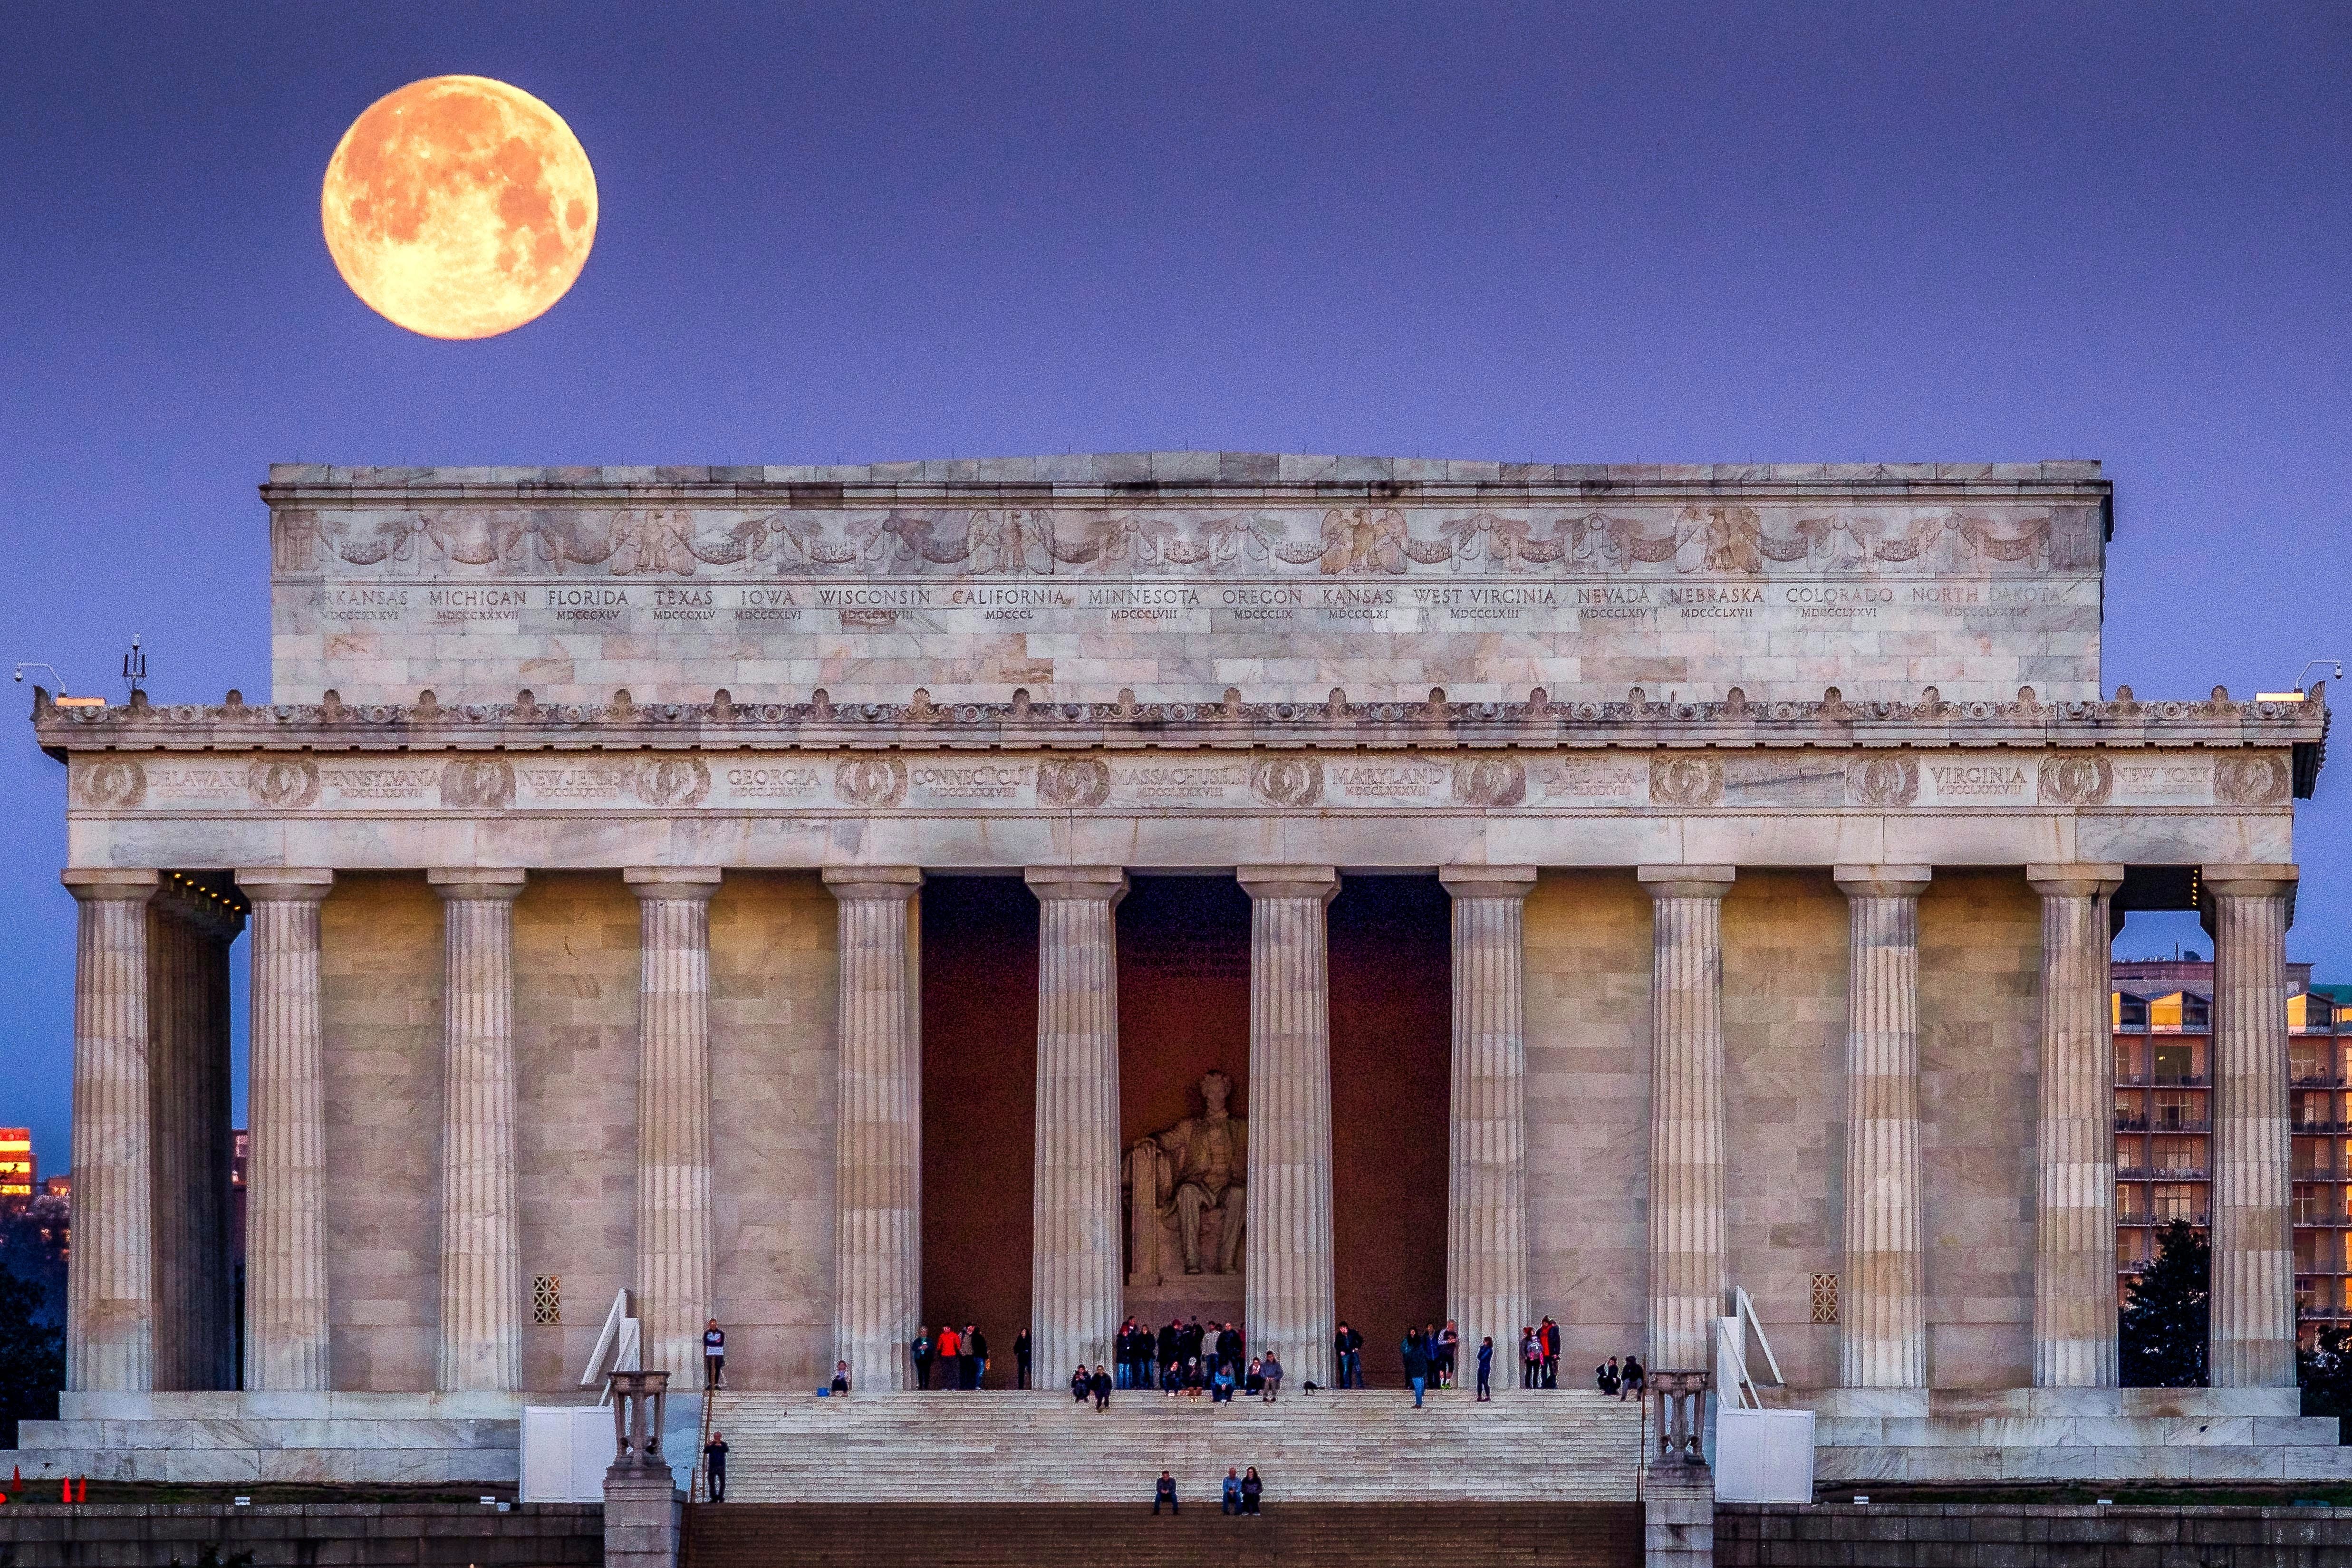 The full moon sets behind the Lincoln Memorial as people line the steps to watch the sun come up across the other end of the National Mall in Washington.